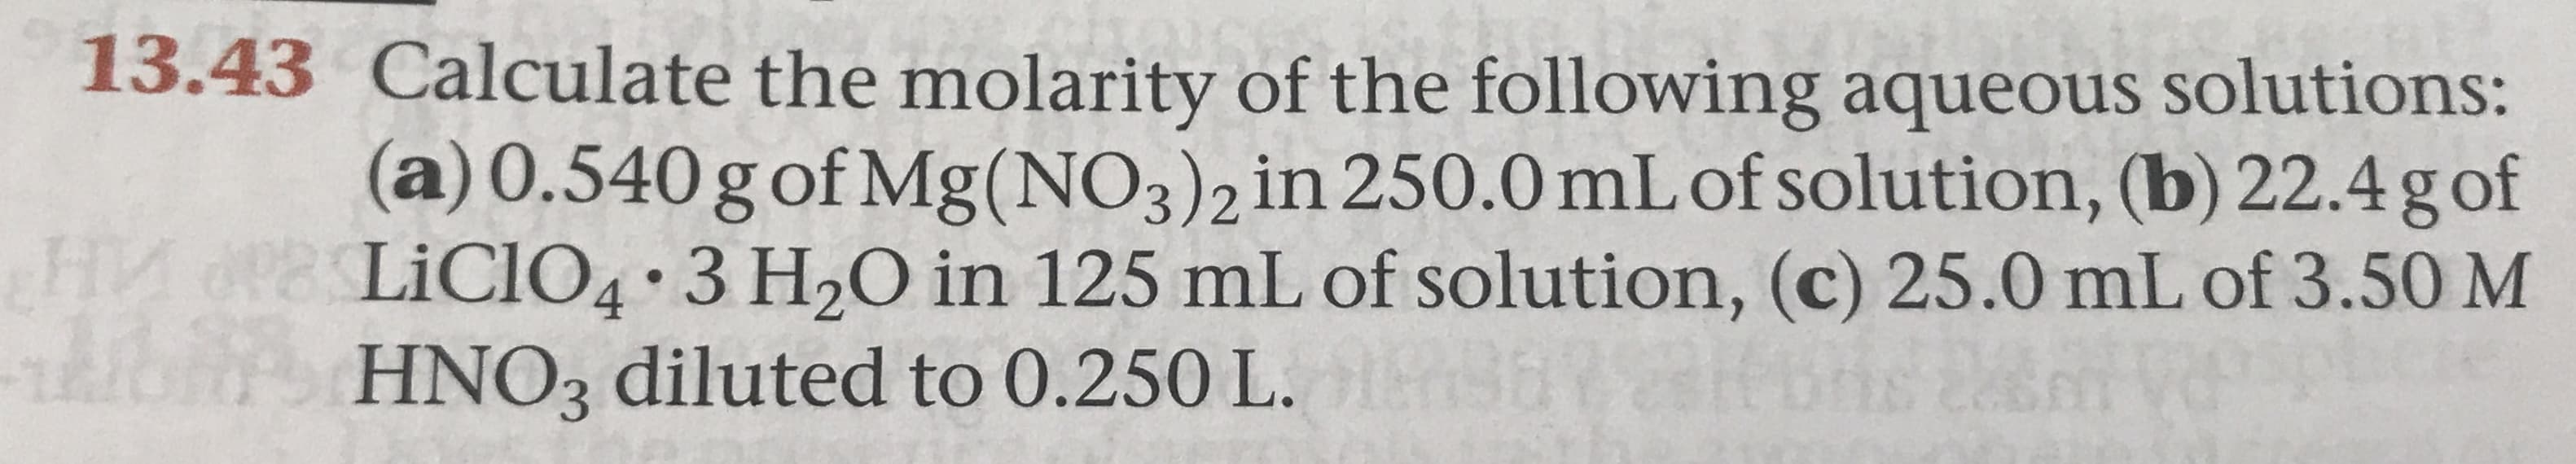 13.43 Calculate the molarity of the following aqueous solutions:
(a) 0.540 g of Mg (NO3 ) 2 in 250.0 mL of solution, (b) 22.4 g of
FHIA PLiCIO4 3 H20 in 125 mL of solution, (c) 25.0 mL of 3.50 M
A HNO3 diluted to 0.250 L. s
n
